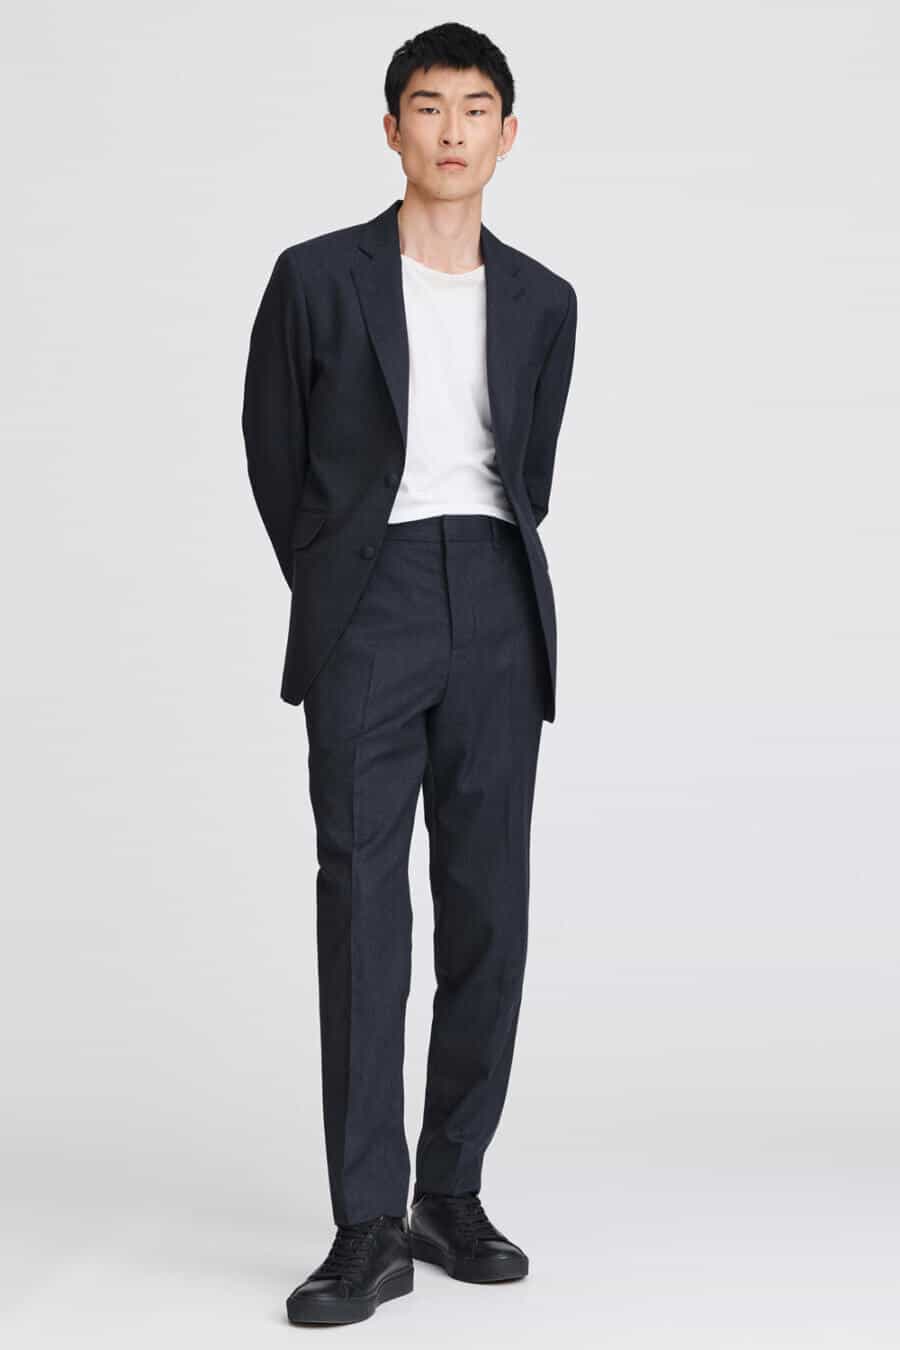 Men's navy suit, white T-shirt and black leather sneakers outfit